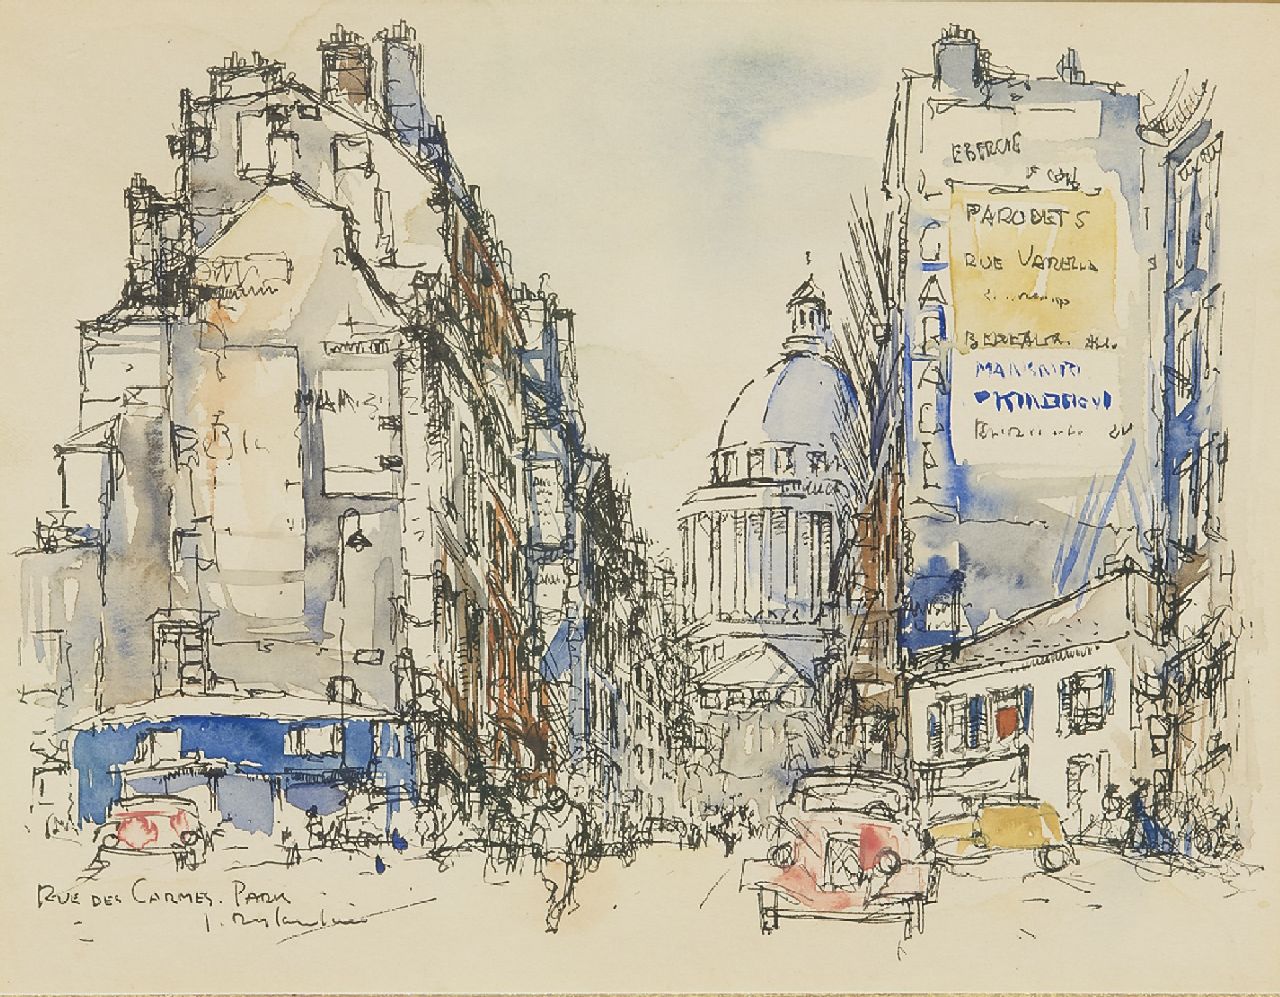 Rijlaarsdam J.  | Jan Rijlaarsdam, The Rue des Carmes, Paris, with a Citroën Traction Avant, pen, ink and watercolour on paper 18.9 x 24.2 cm, signed l.l. and executed in the 1950s